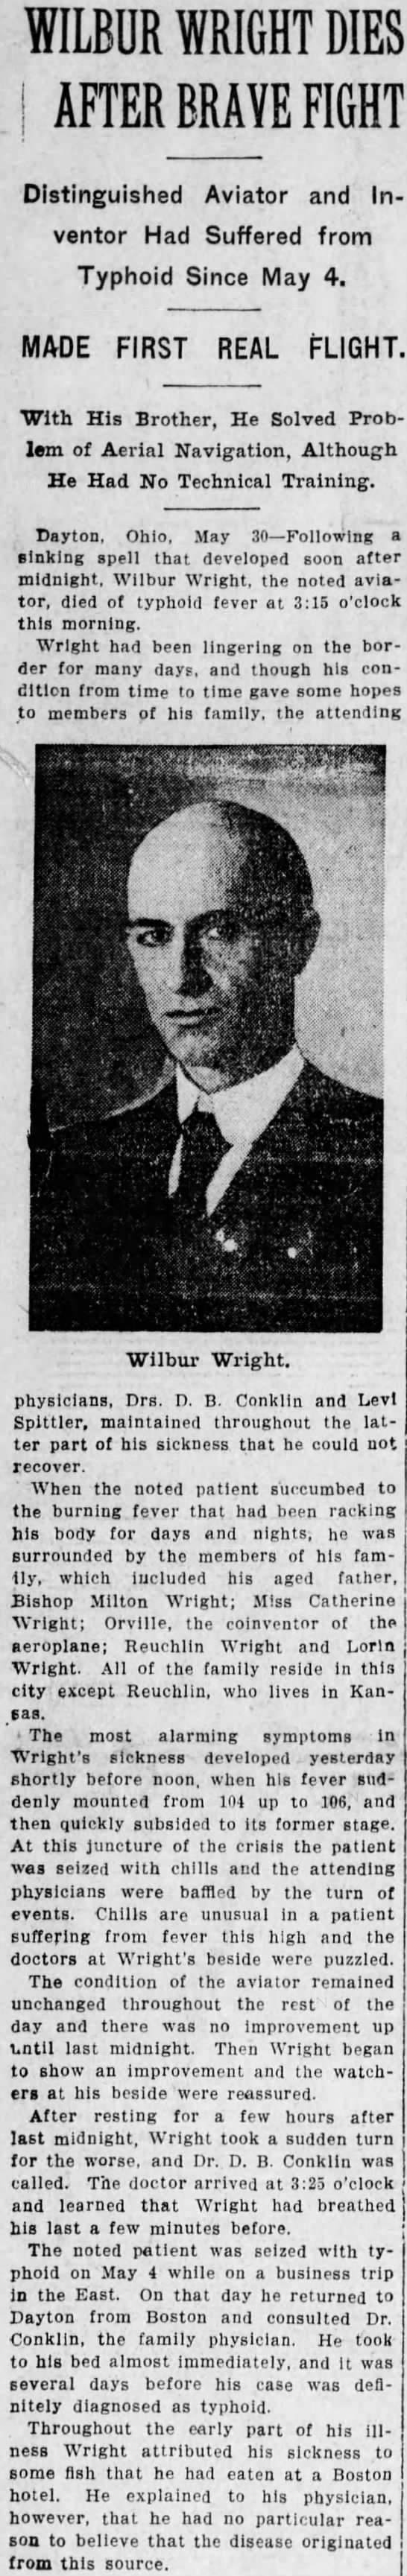 "Wilbur Wright Dies After Brave Fight" with typhoid fever, May 1912 - 